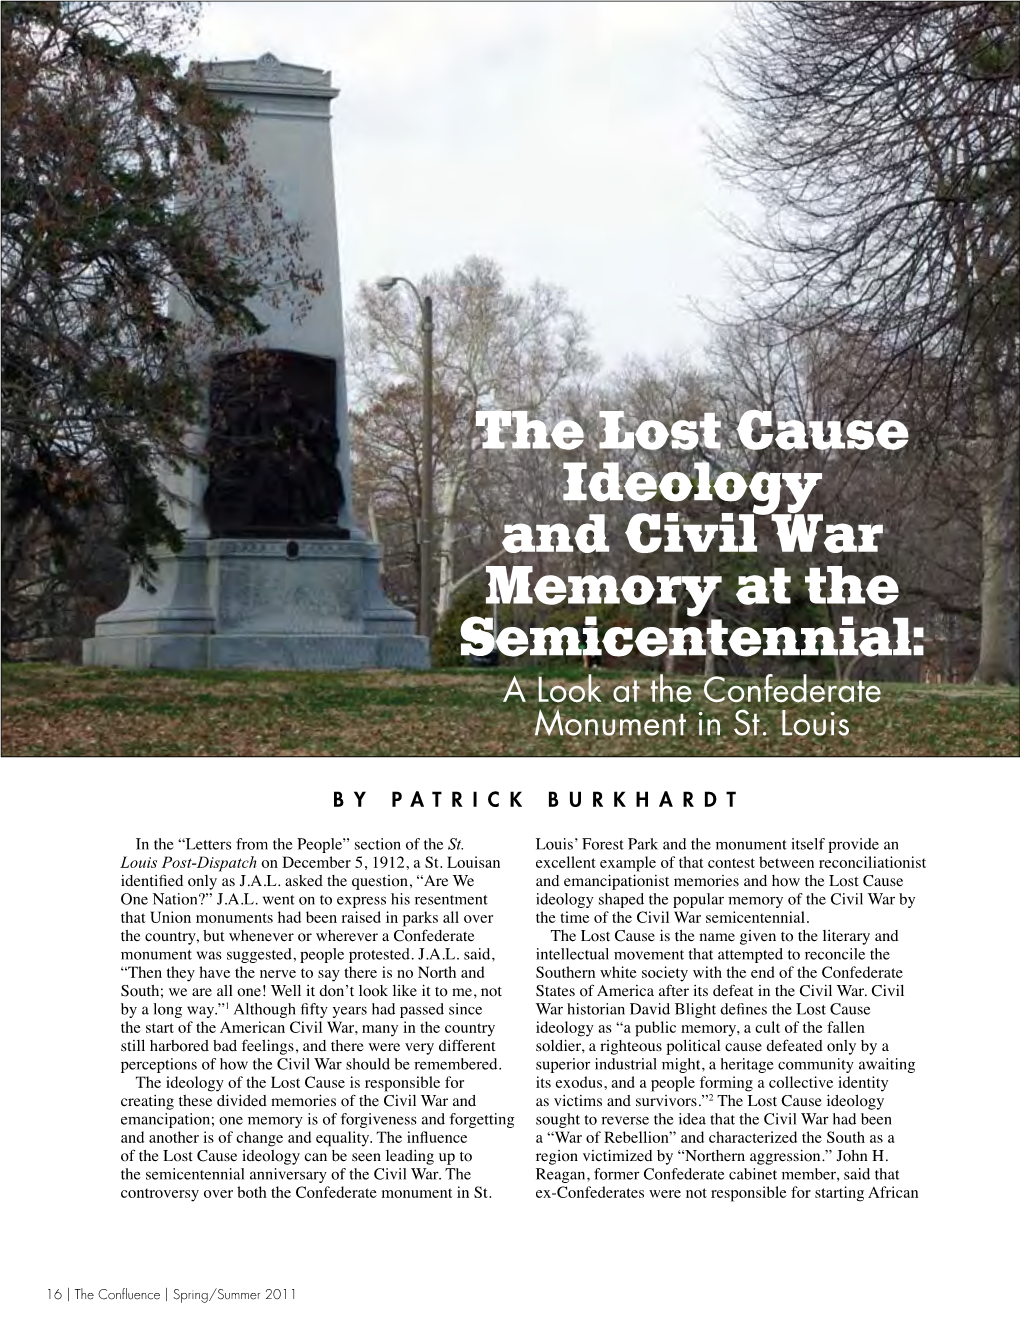 The Lost Cause Ideology and Civil War Memory at the Semicentennial: a Look at the Confederate Monument in St